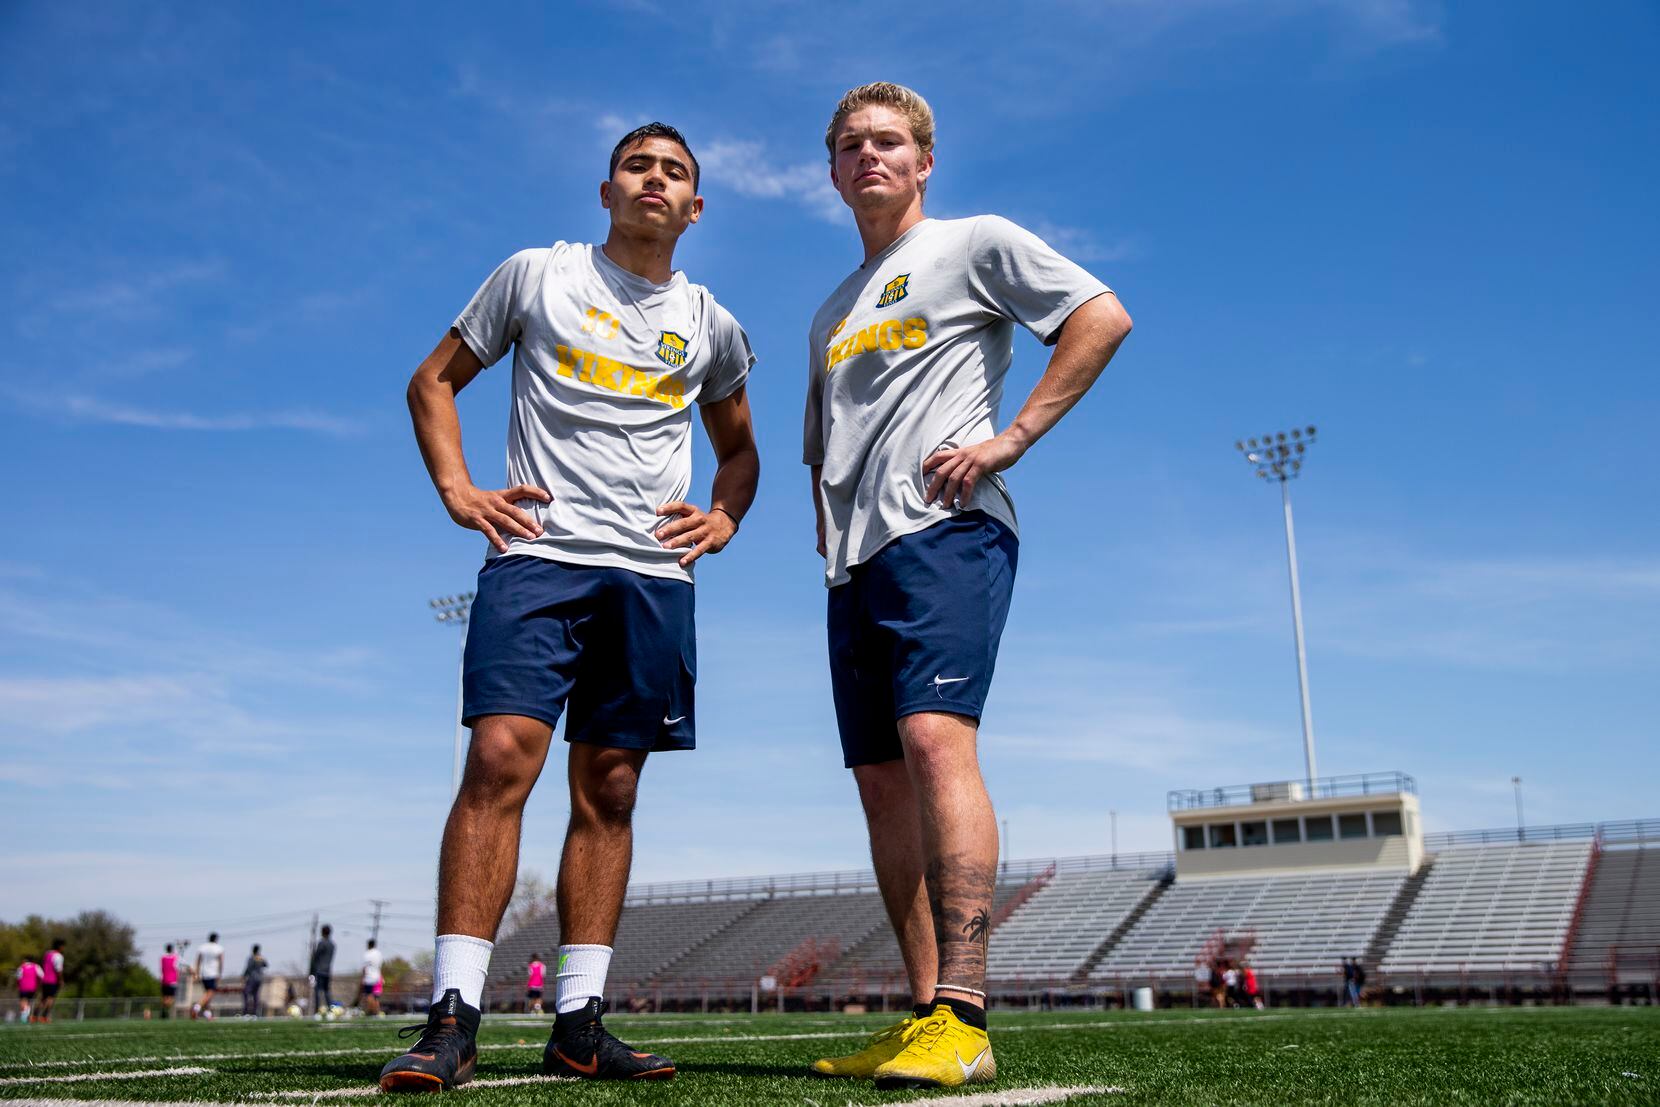 Jasub Flores, left, pose for a photograph with his teammate Austin Sparks during a soccer practice at Lamar high school in Arlington, Texas on Wednesday, March 27, 2019. (Shaban Athuman/The Dallas Morning News)